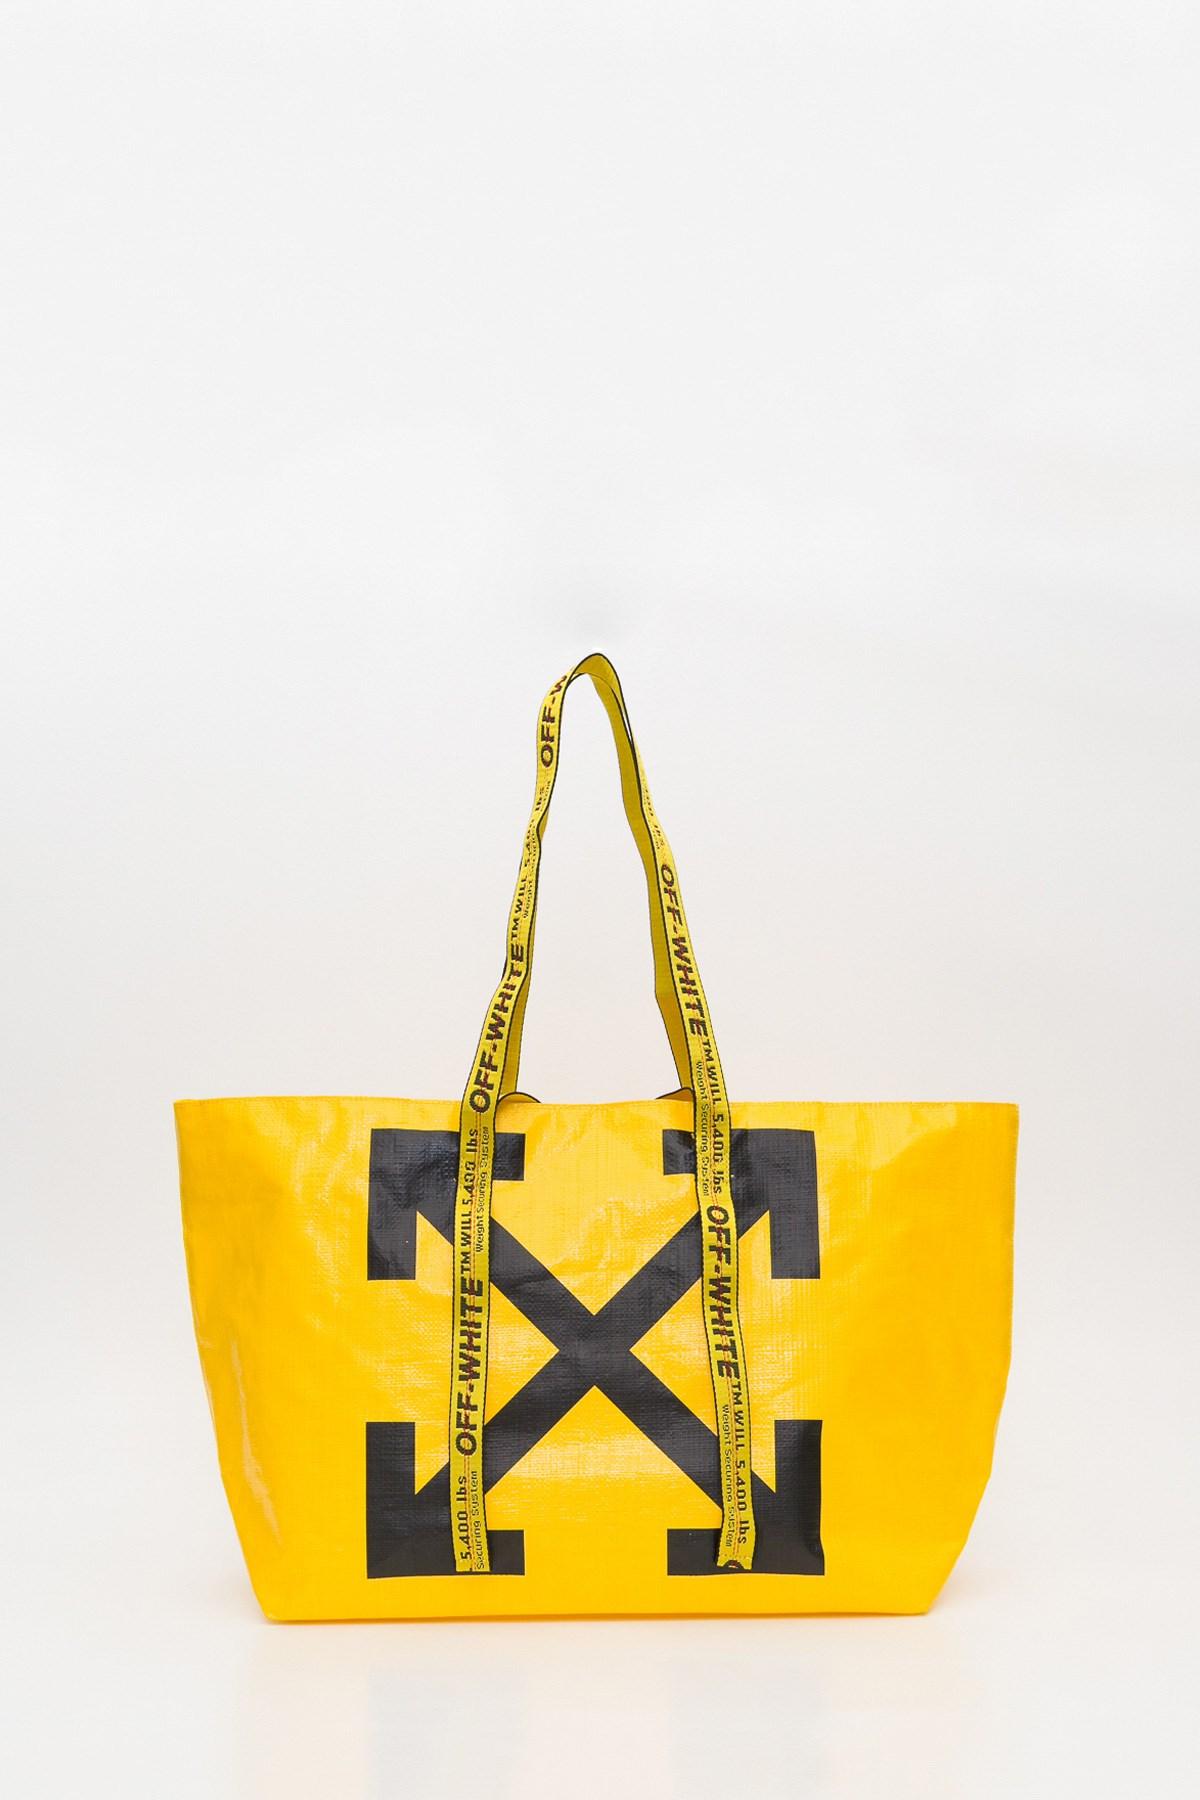 Off-White c/o Virgil Abloh Commercial Tote - Silver Totes, Handbags -  WOWVA52978